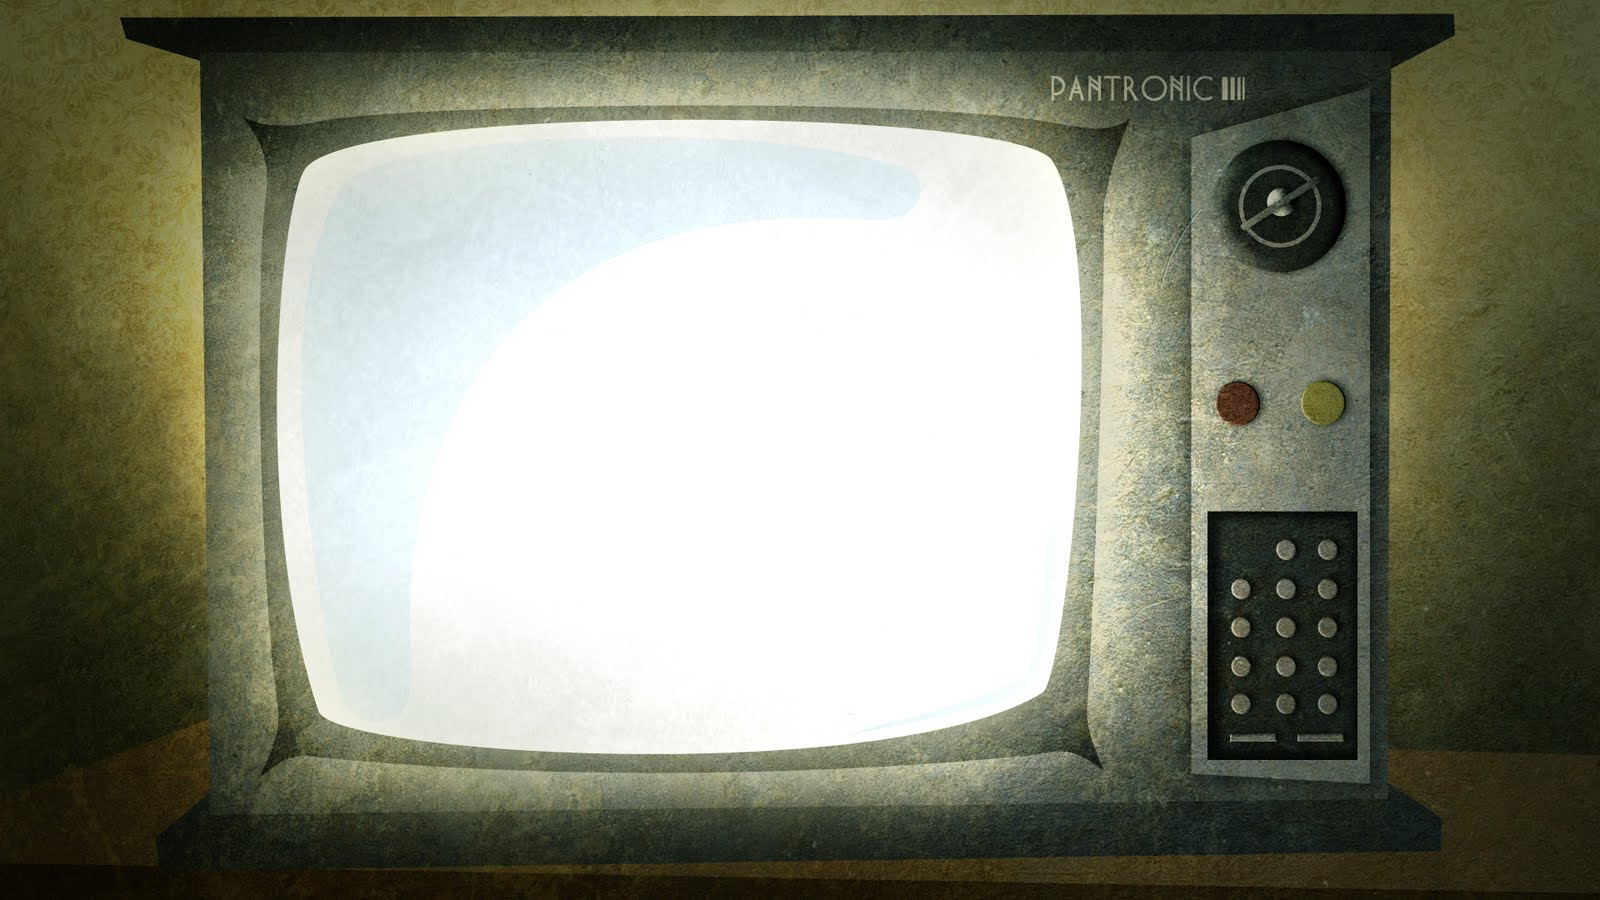 Old TV Set, Background Powerpoint # 1600x900. All For Desktop